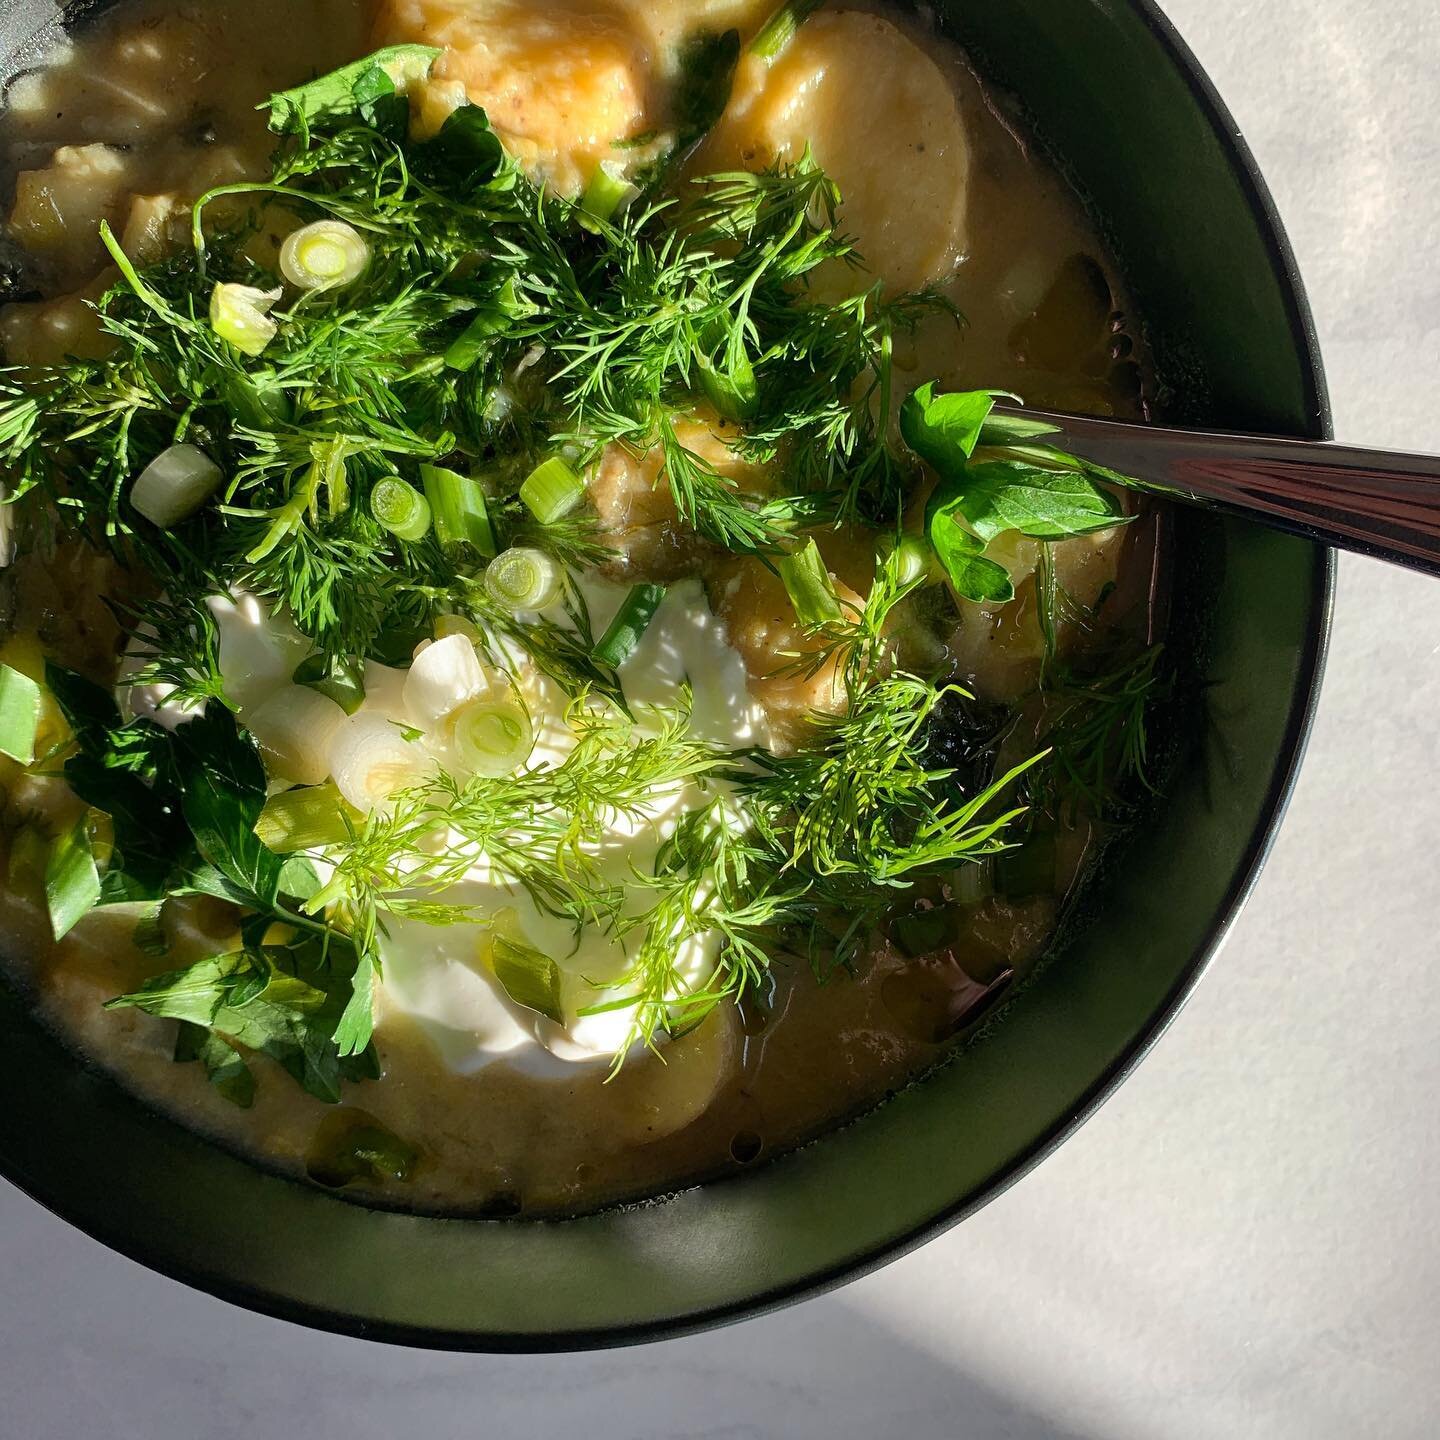 @alisoneroman&rsquo;s creamy potato soup with greens and lots of dill